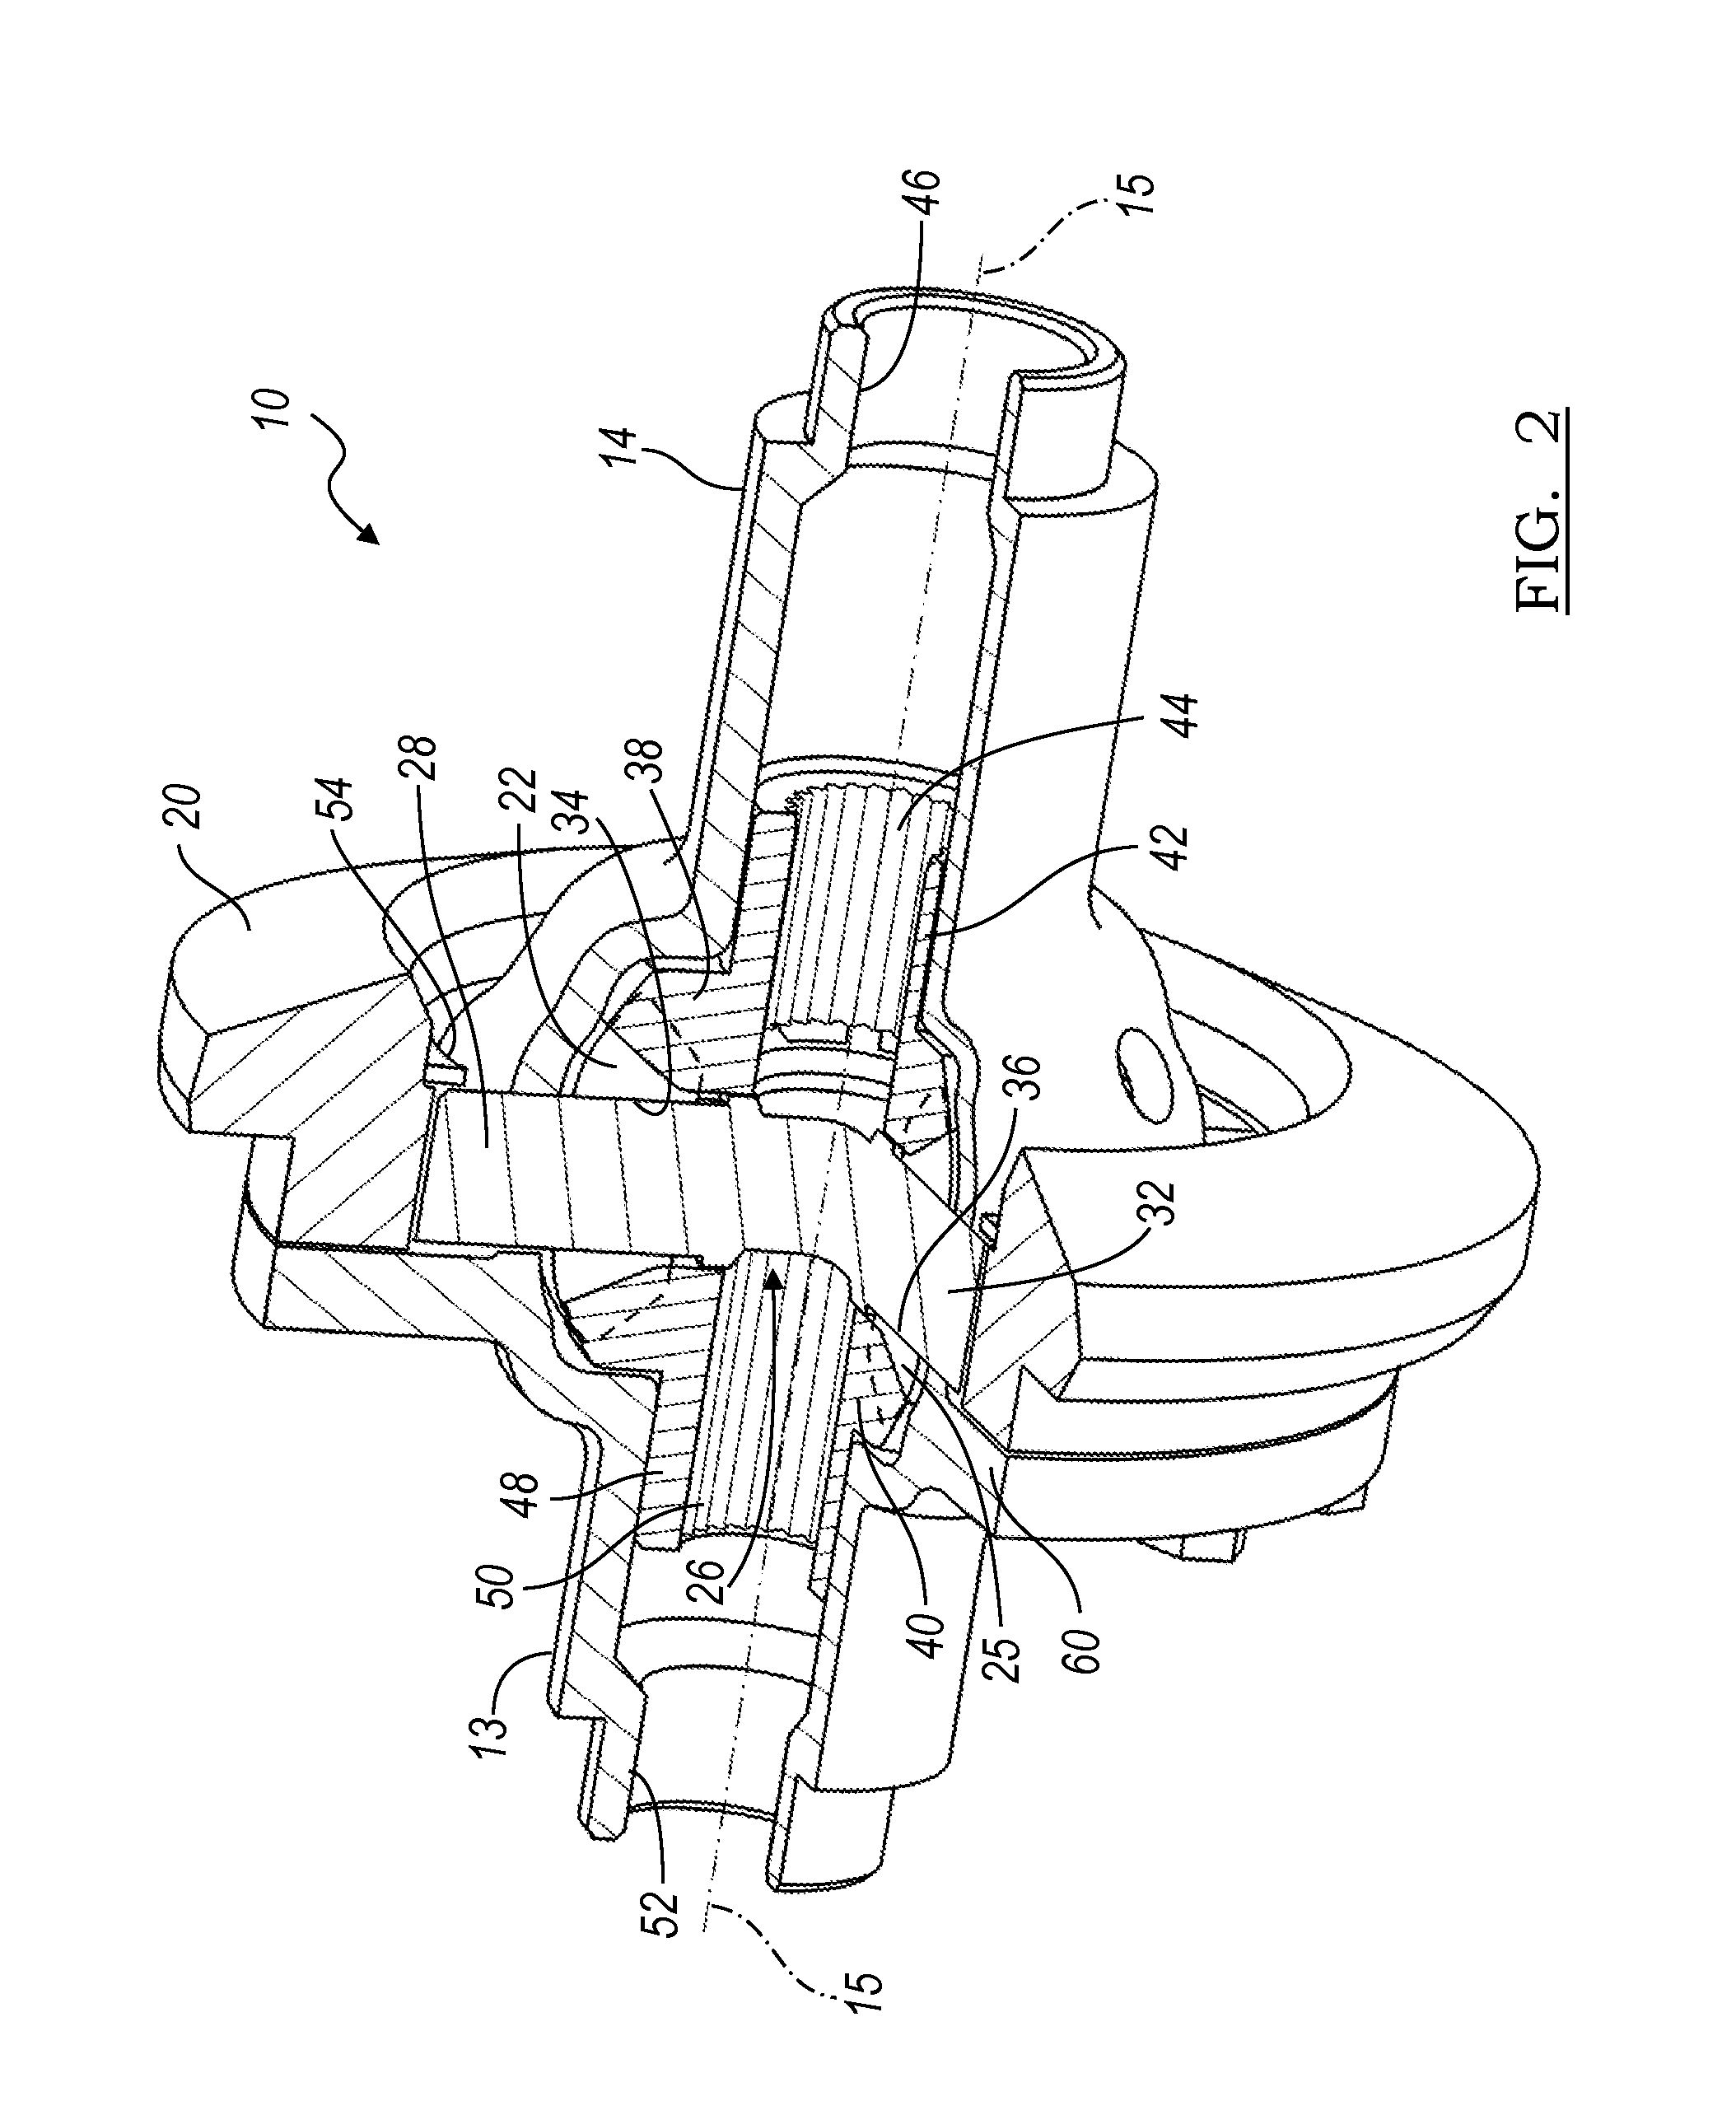 Differential mechanism having multiple case portions